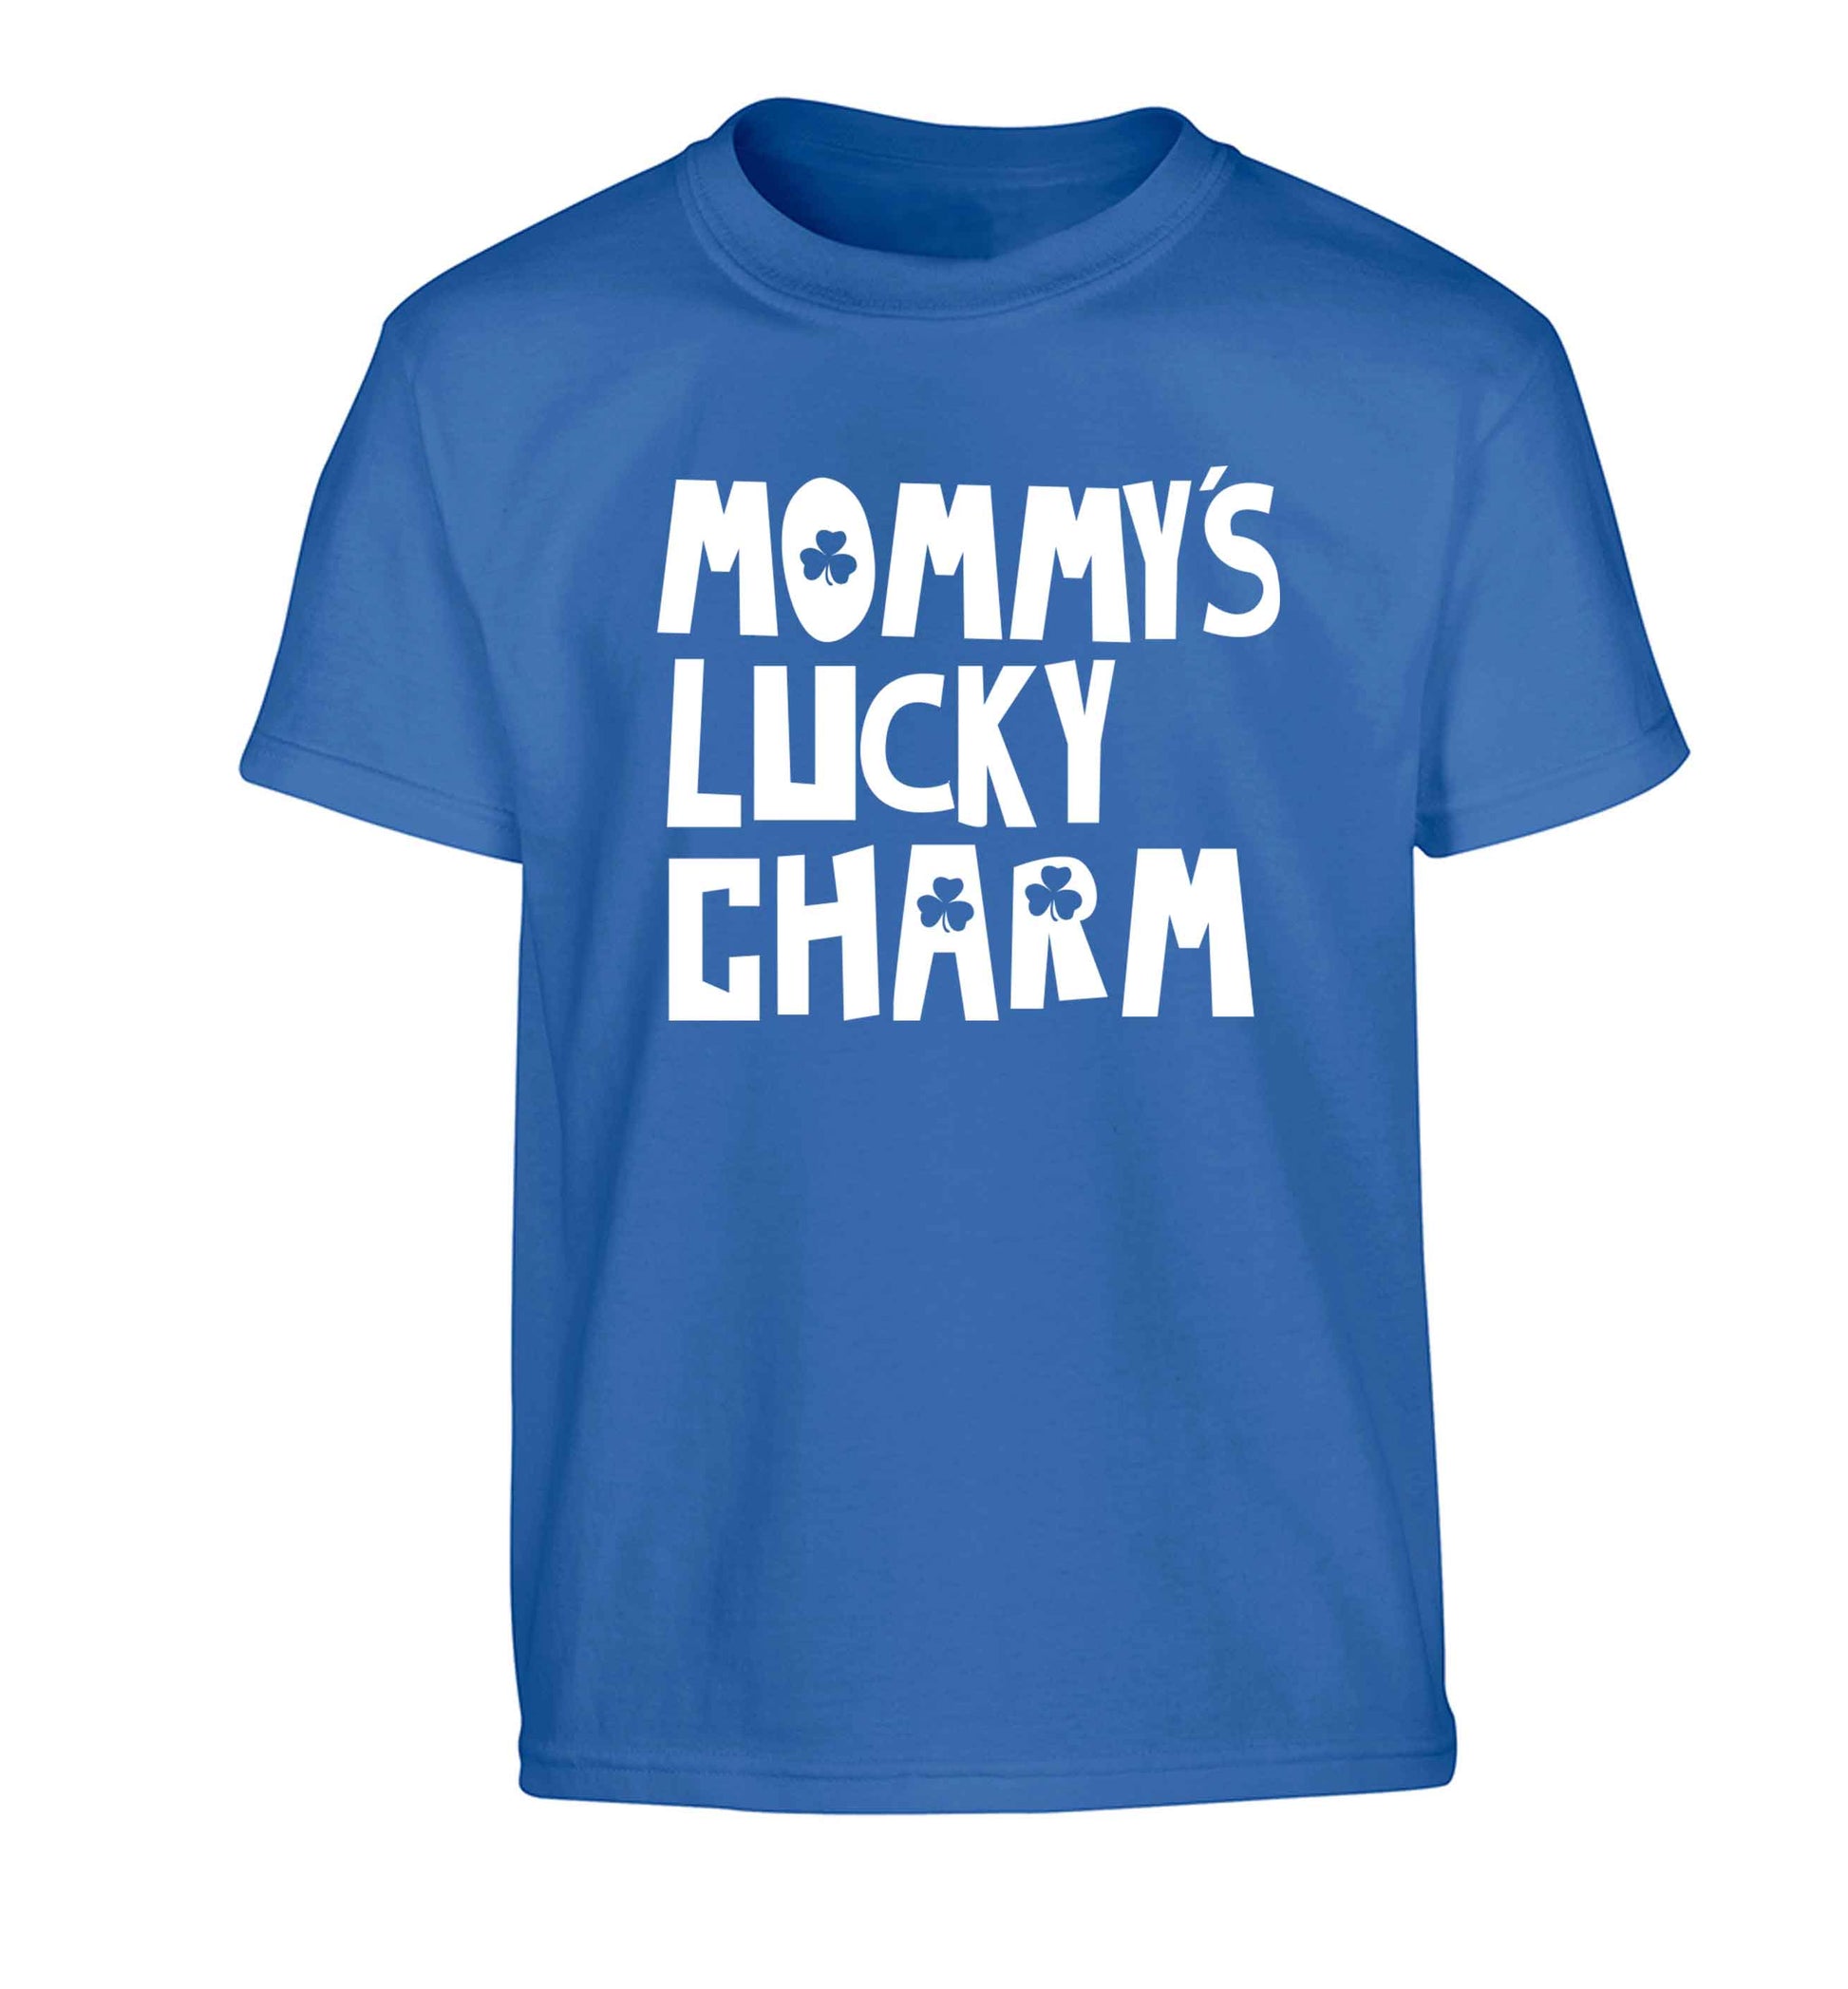 Mommy's lucky charm Children's blue Tshirt 12-13 Years